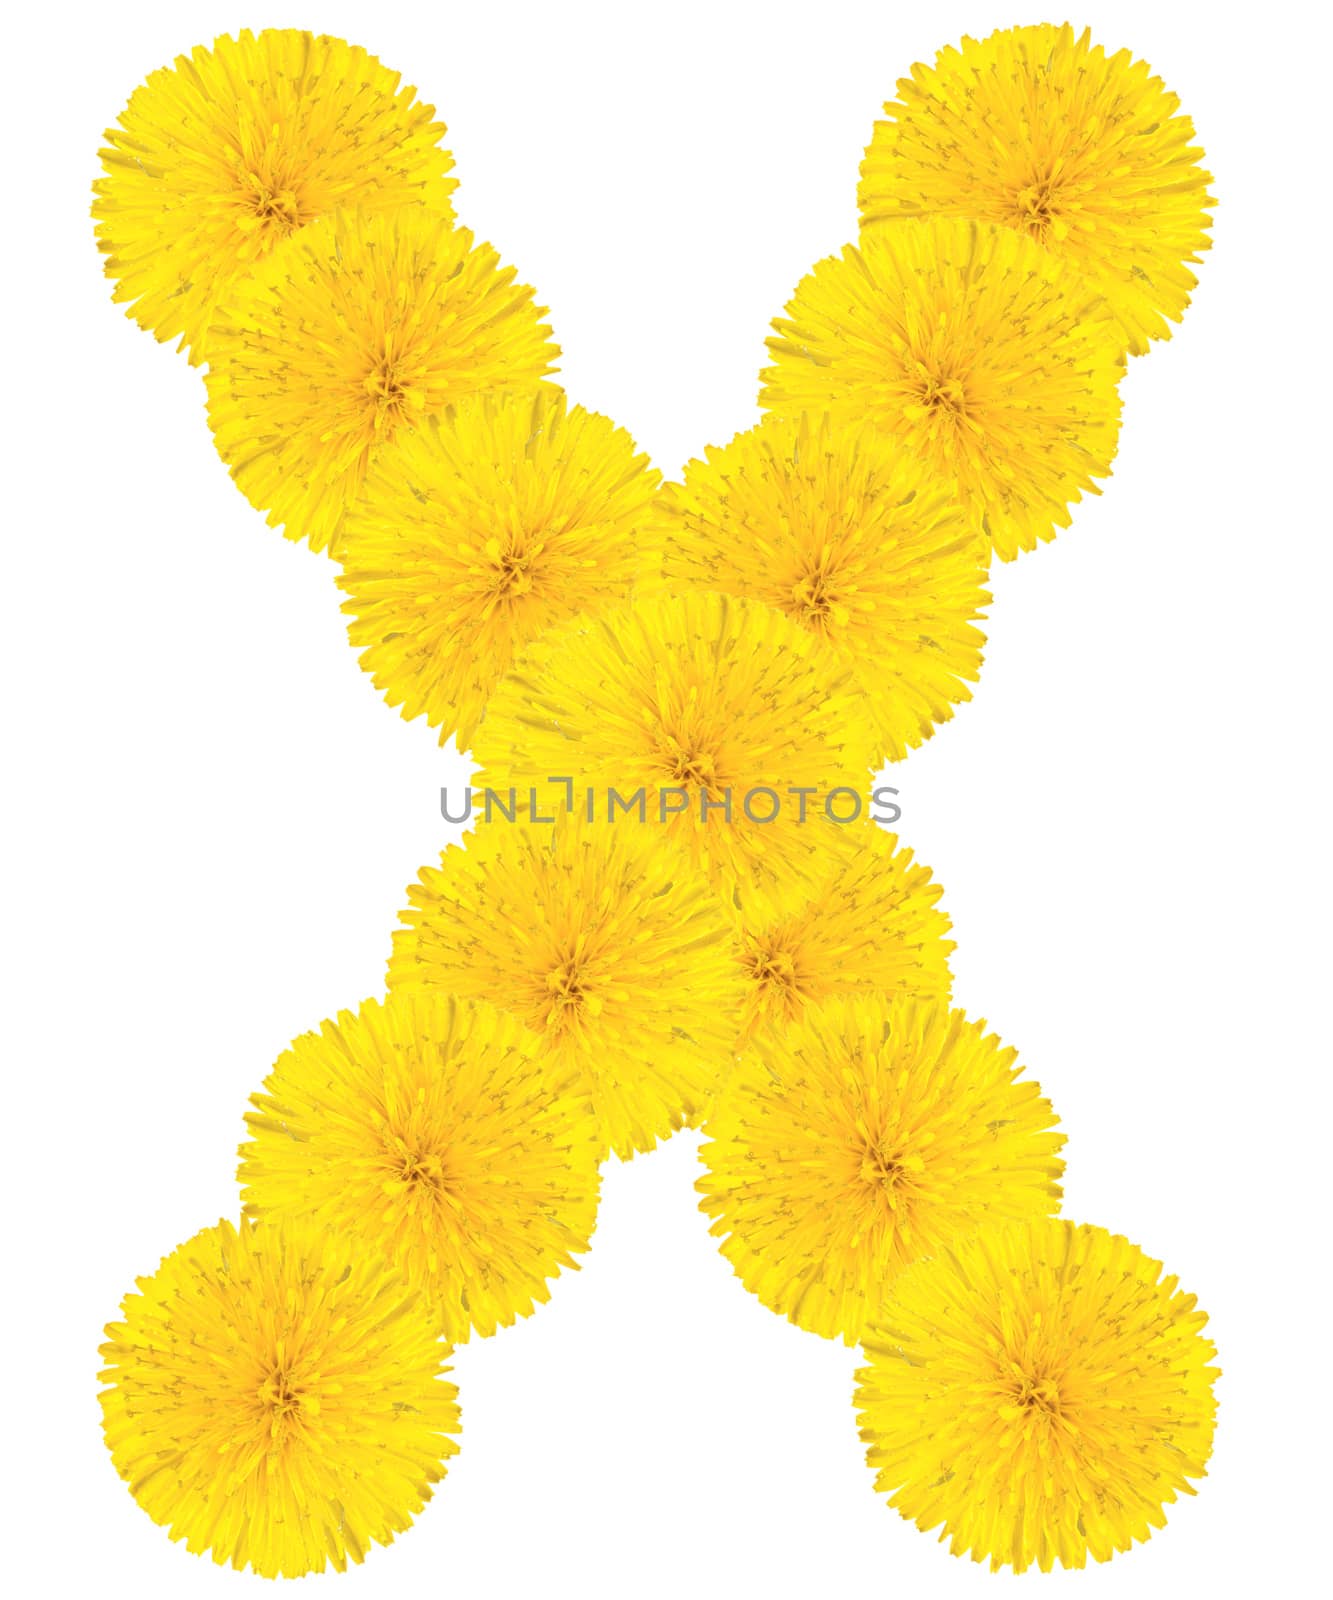 Letter X made from dandelion flowers isolated on white background